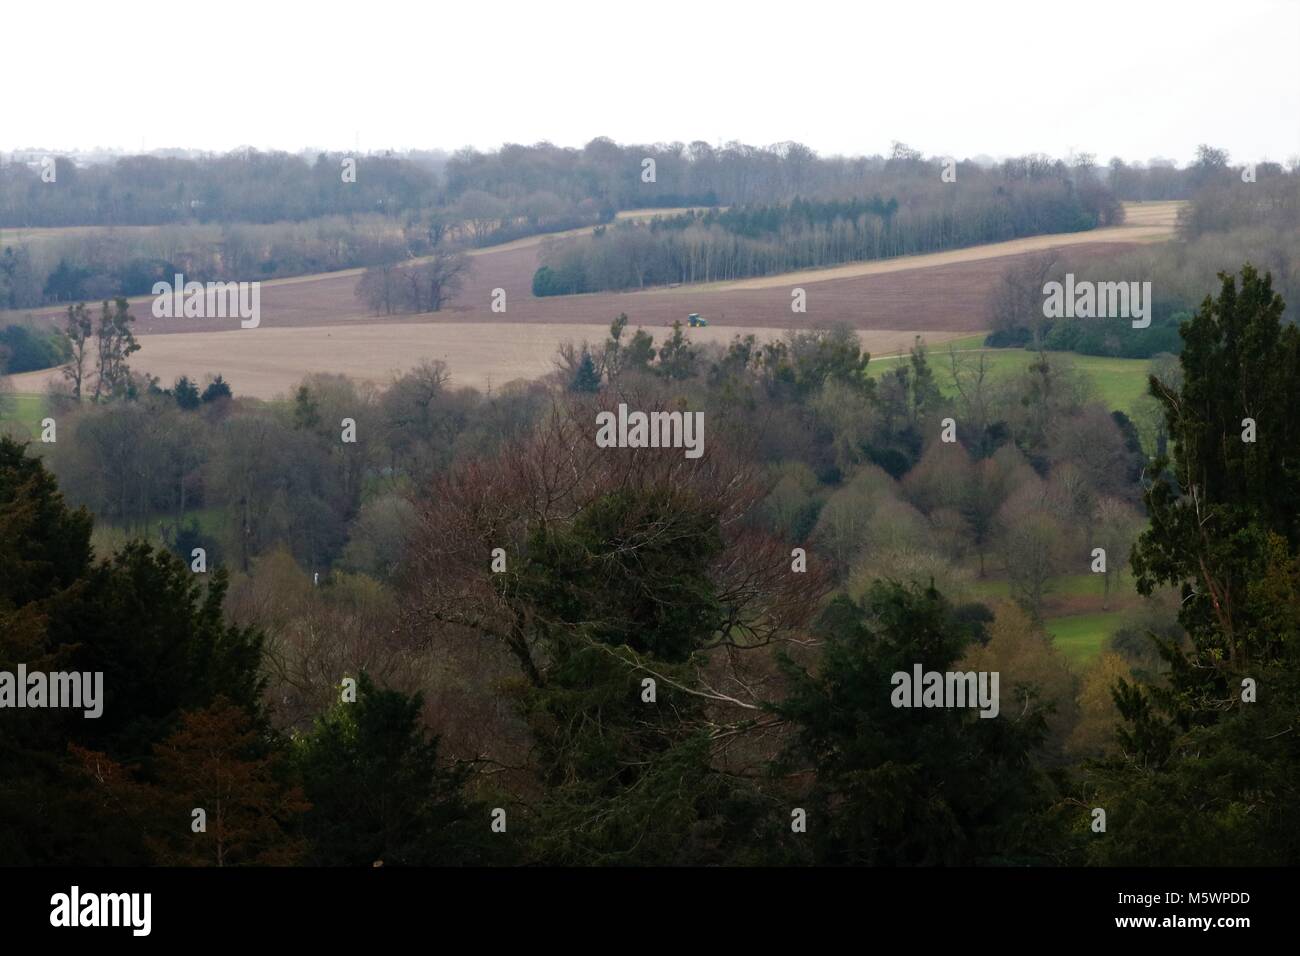 Beautiful landscape view of Buckinghamshire, UK countryside with a tractor in the distance Stock Photo